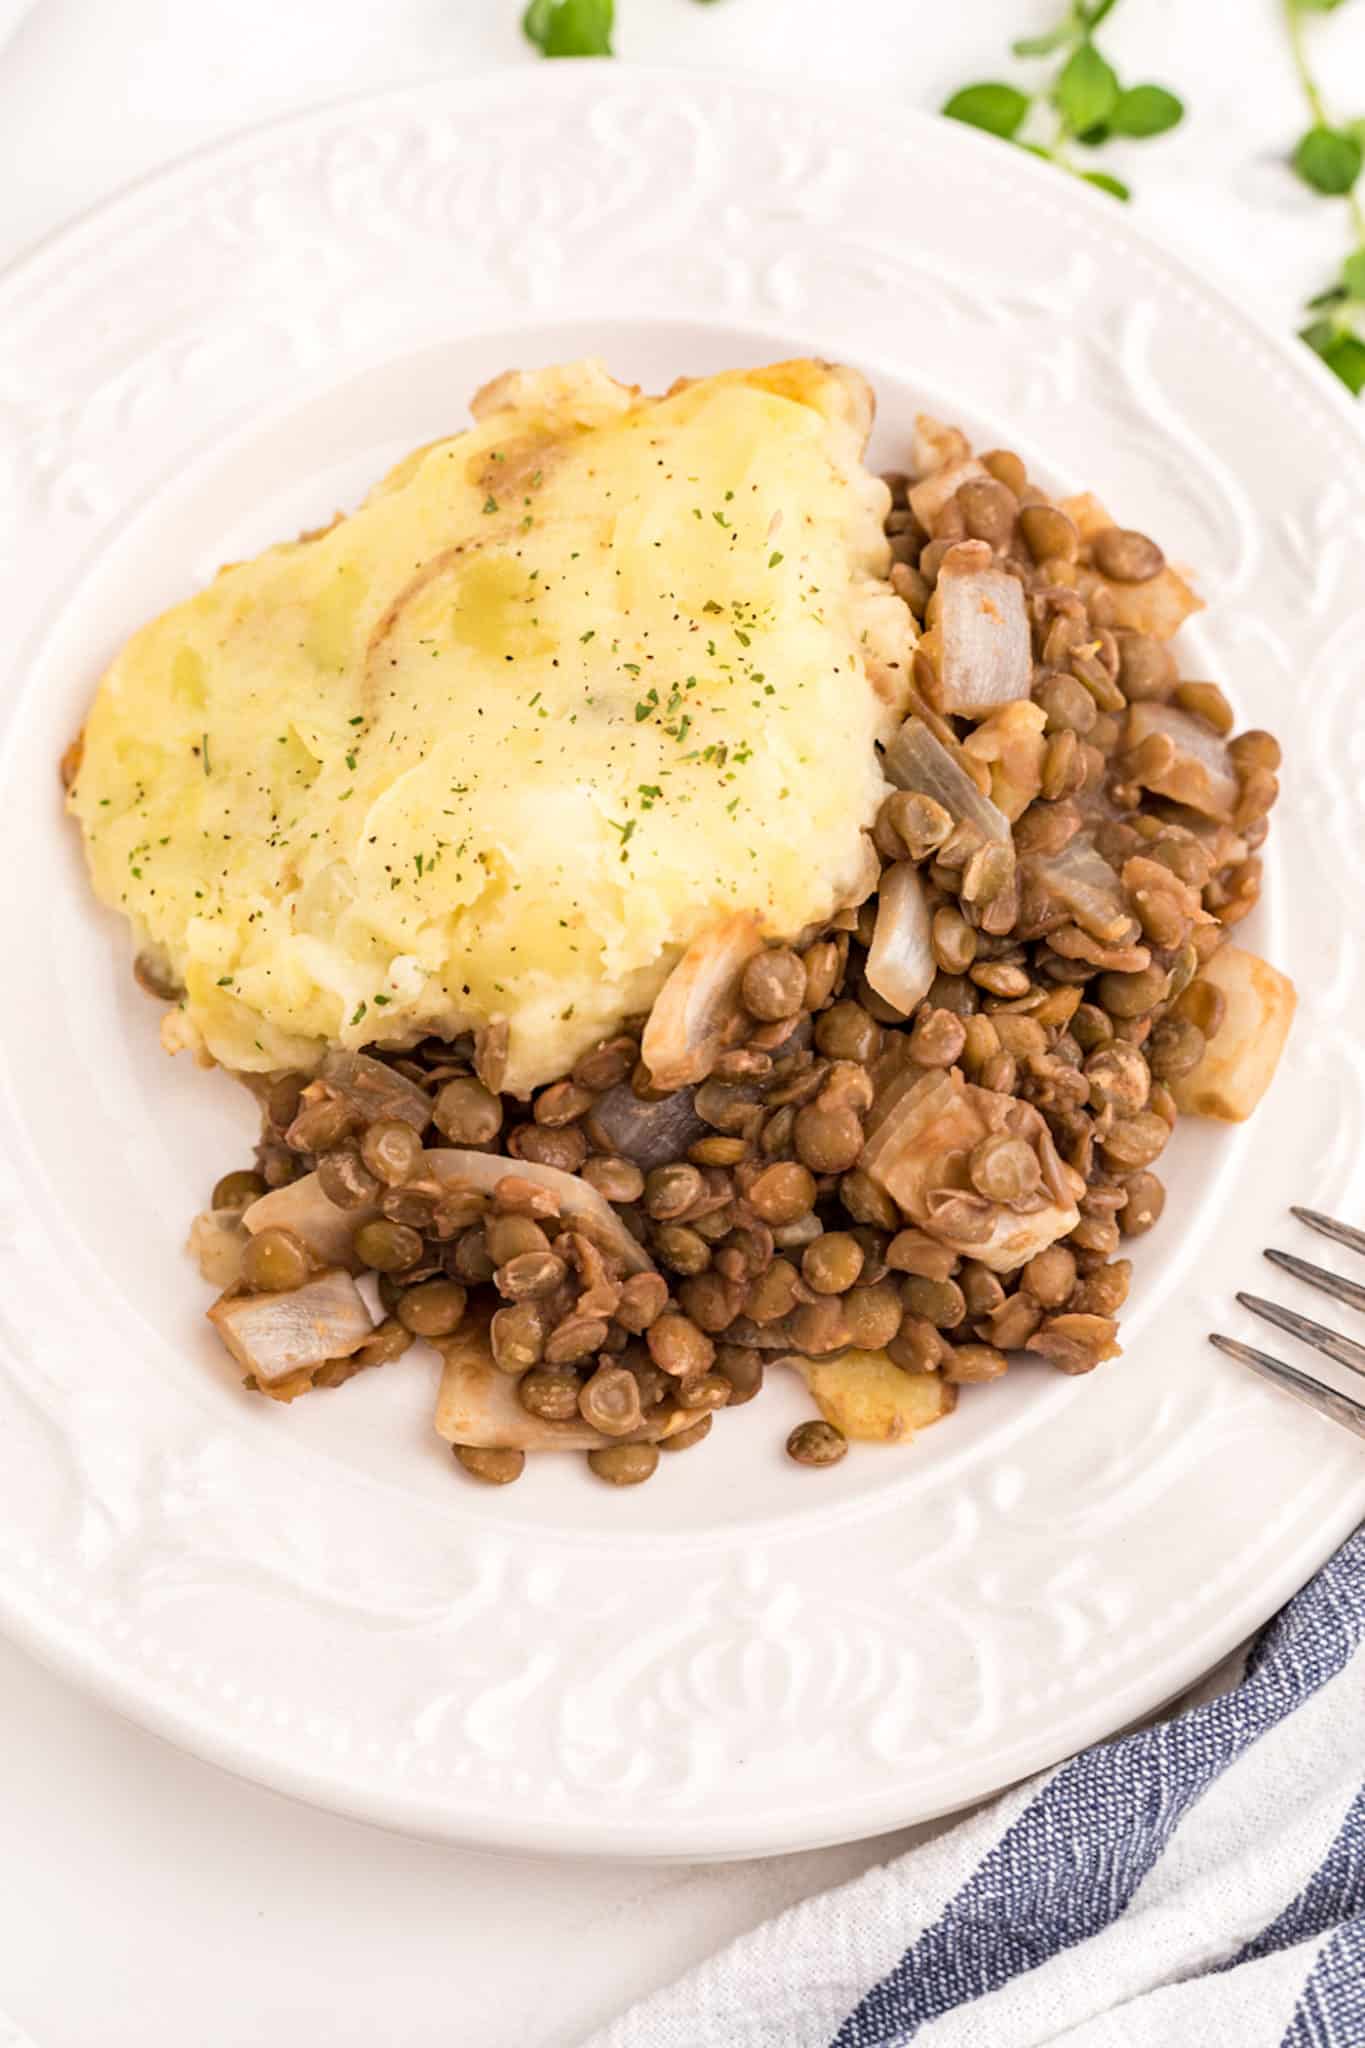 mashed potatoes with lentils on a plate